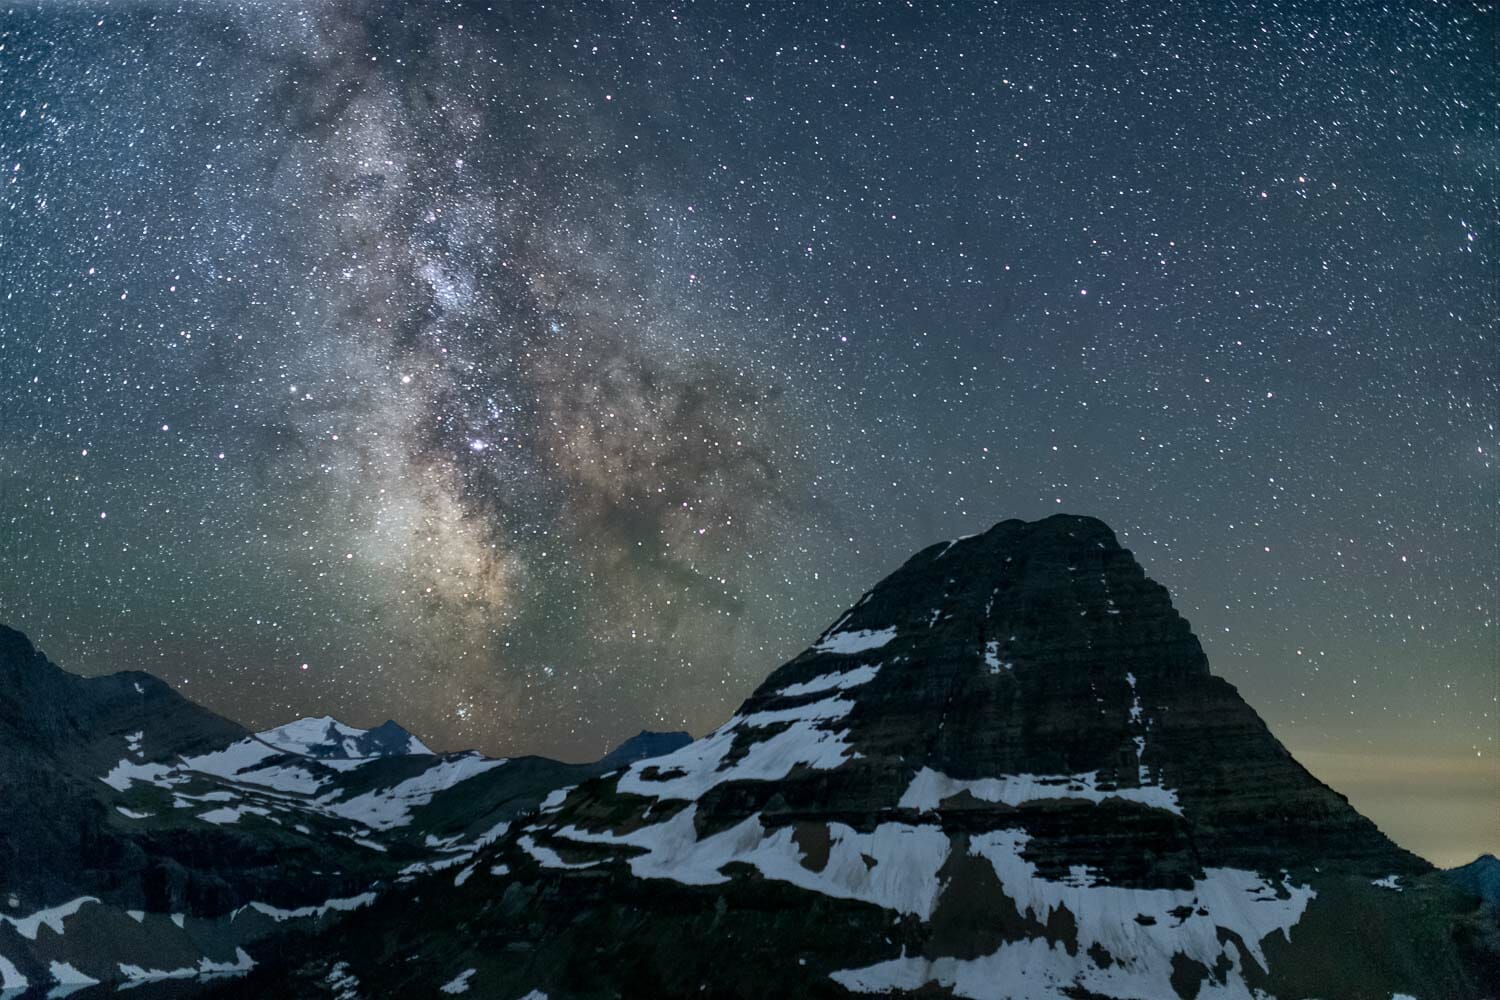 Milky Way shines over Raynolds Mountain in Glacier National Park